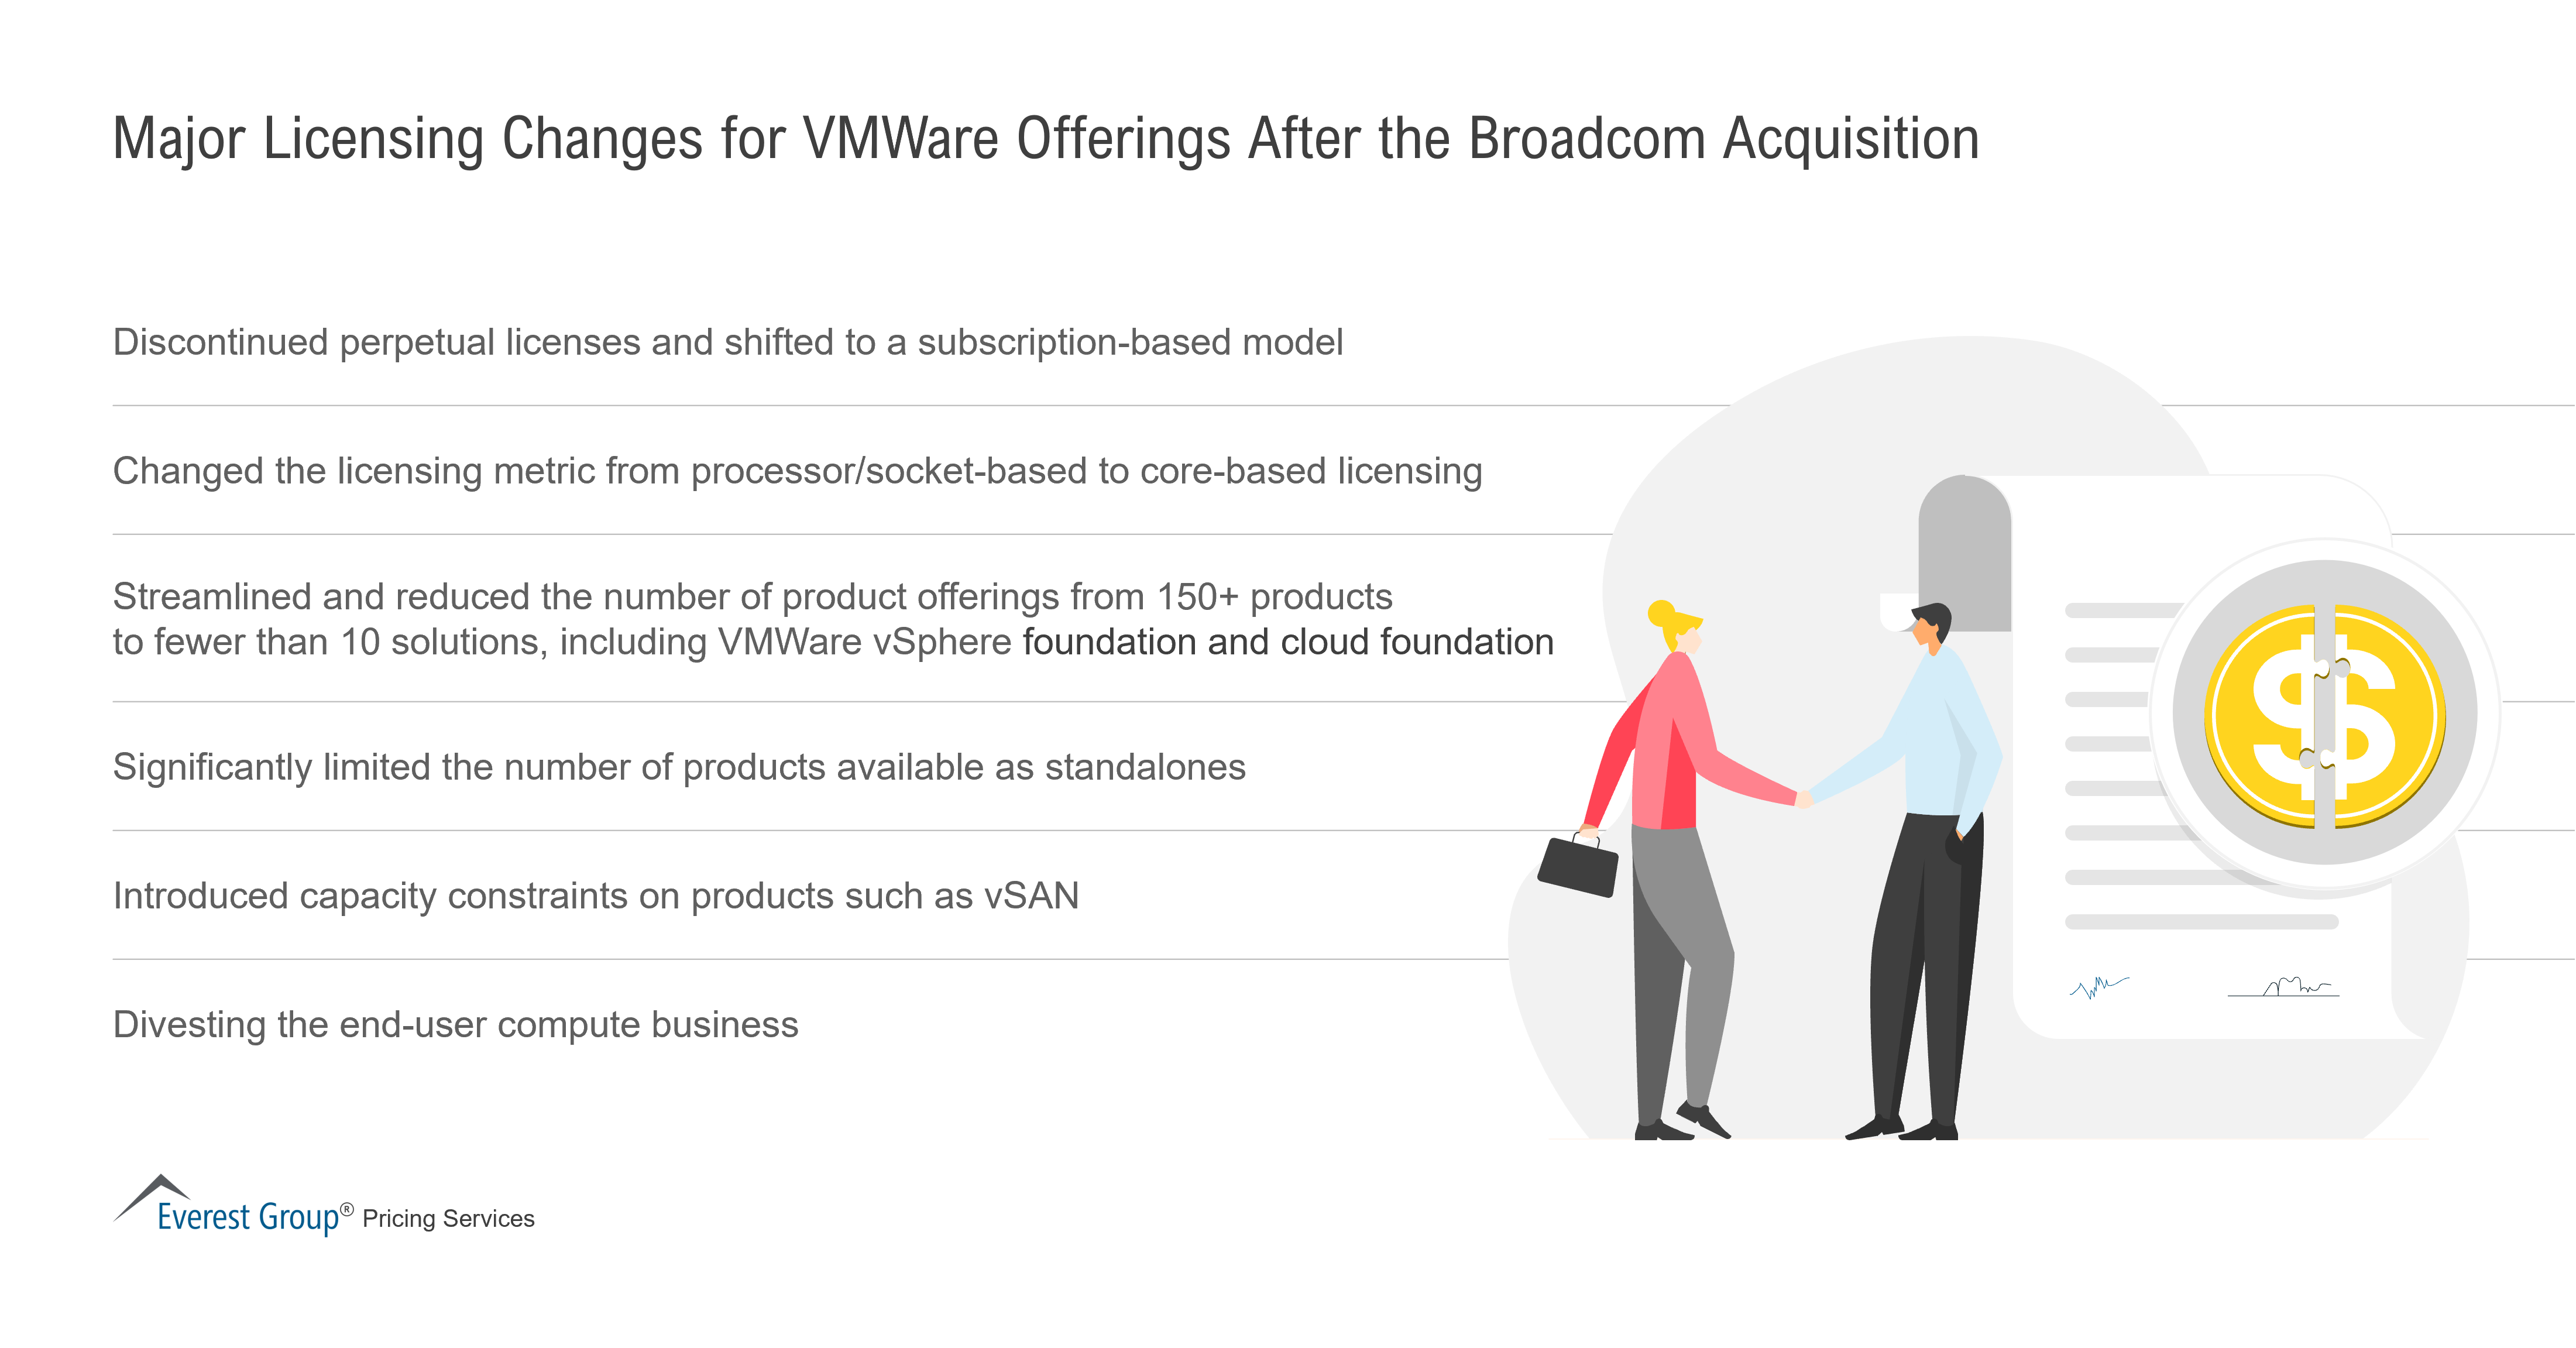 Major Licensing Changes for VMWare offerings After the Broadcom Acquisition